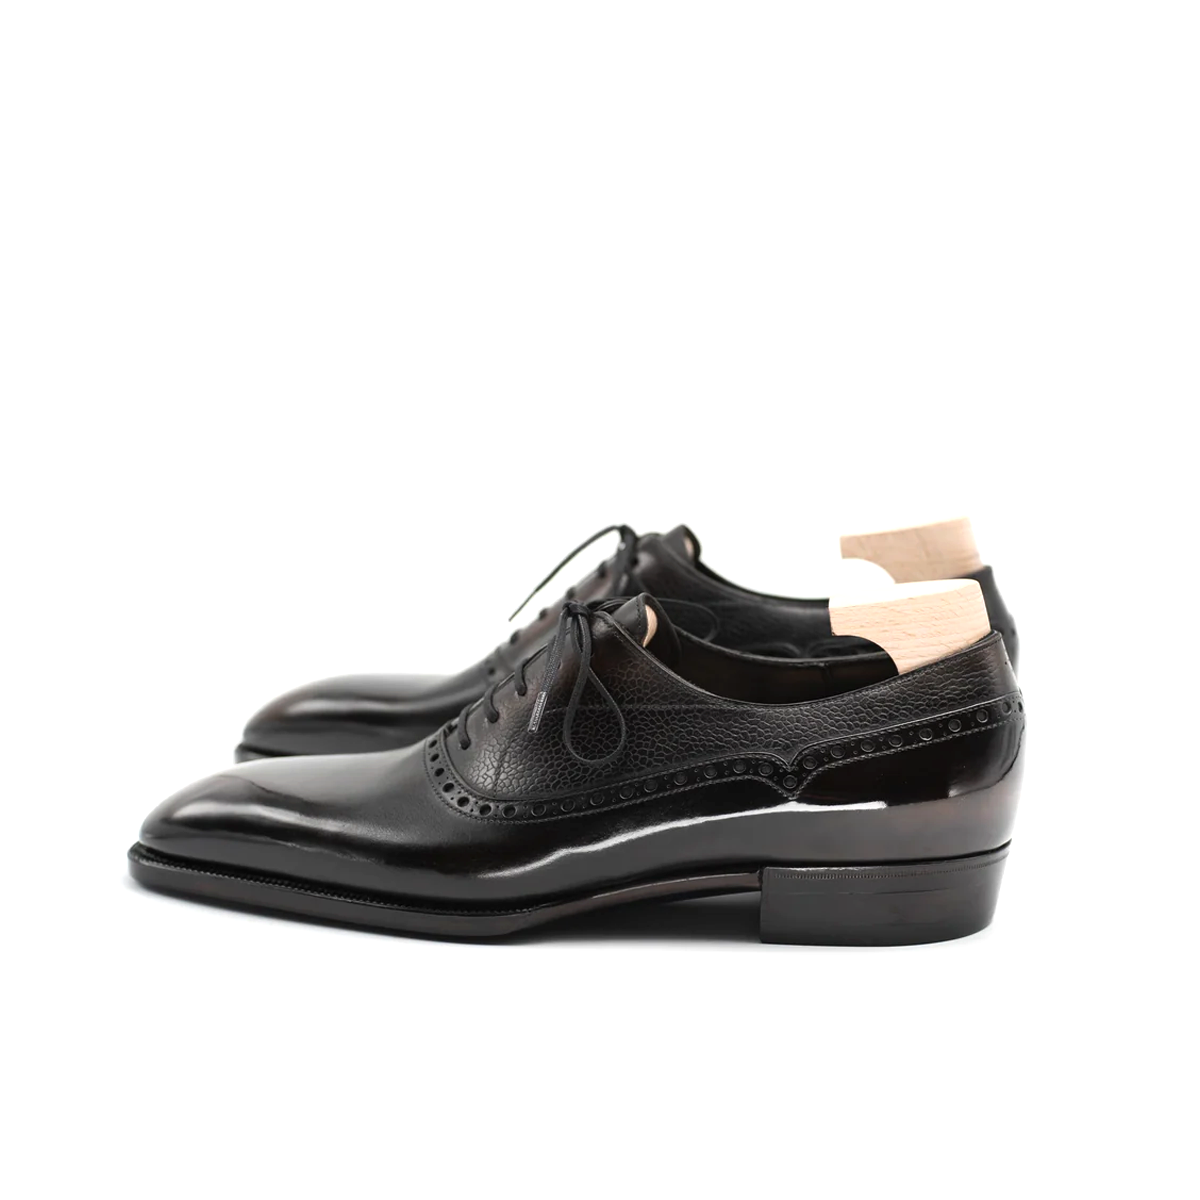 Ethereal Essence Oxford Shoes